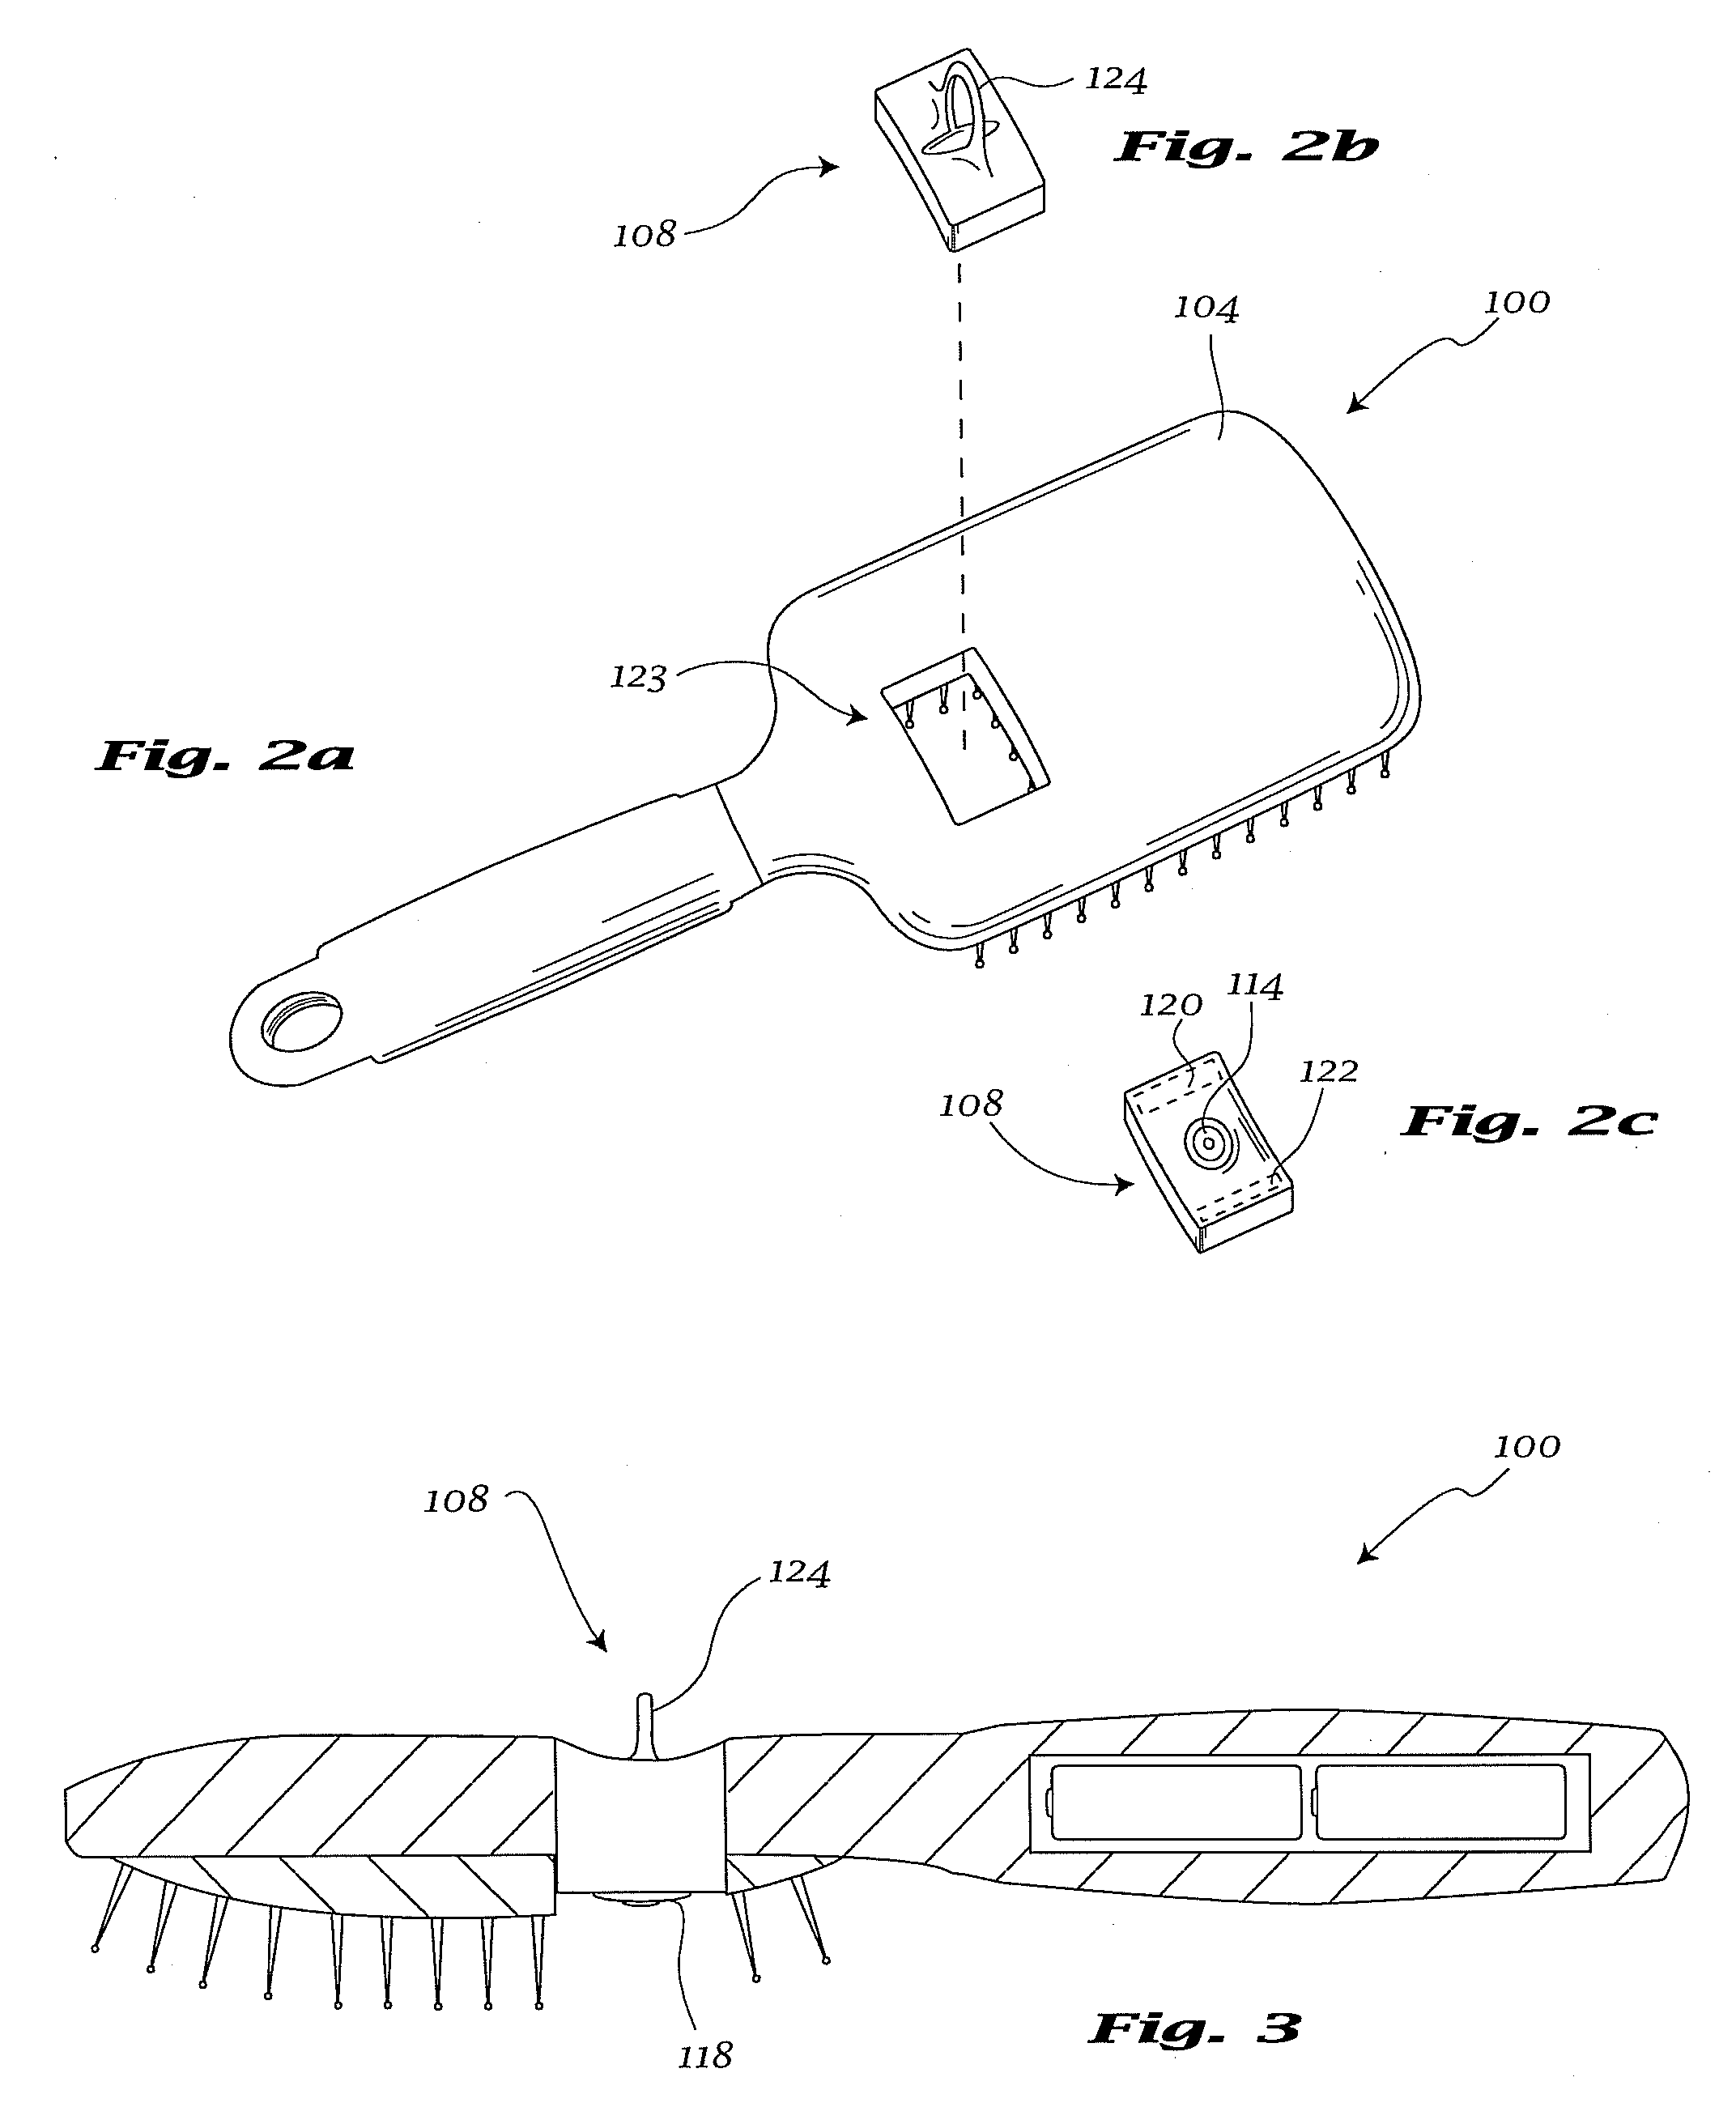 Hair styling system and apparatus